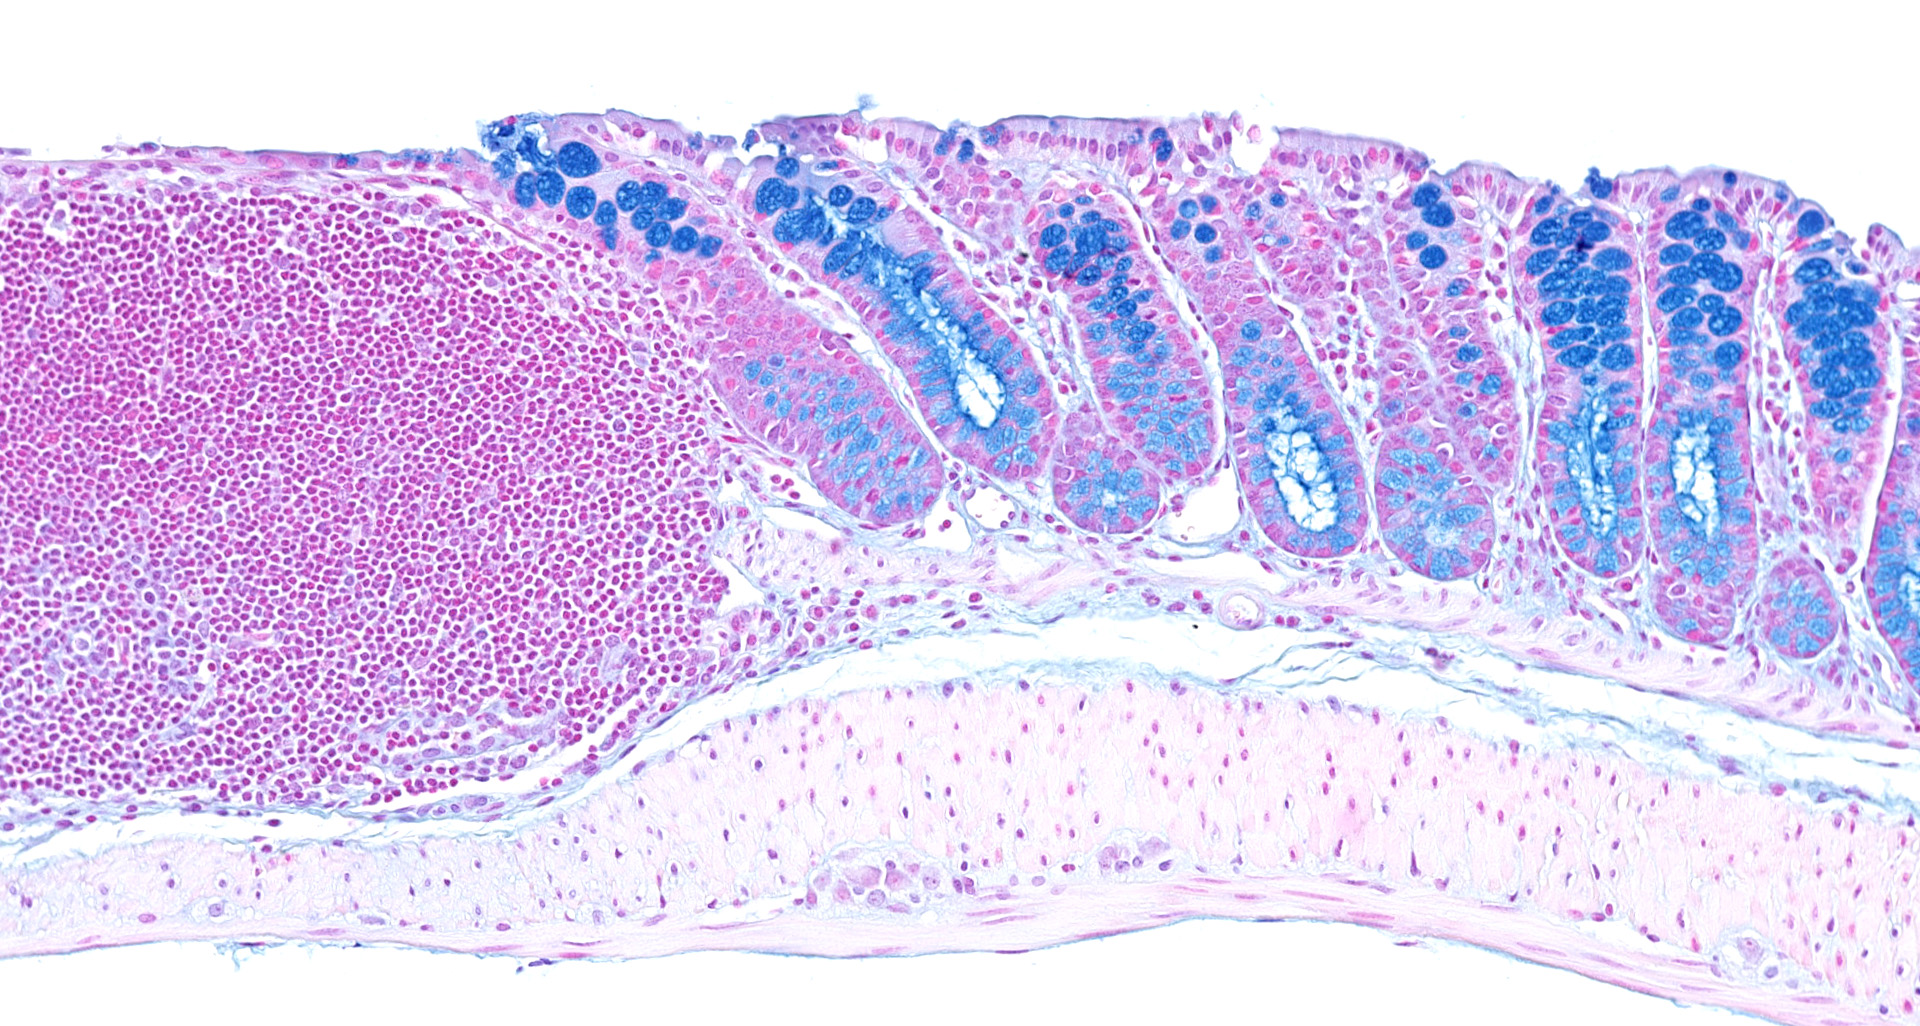 Alcian Blue / Nuclear fast red staining of mouse distal colon. Goblet cell mucins appear in blue. A large lymphoid aggregate can be seen on the left.